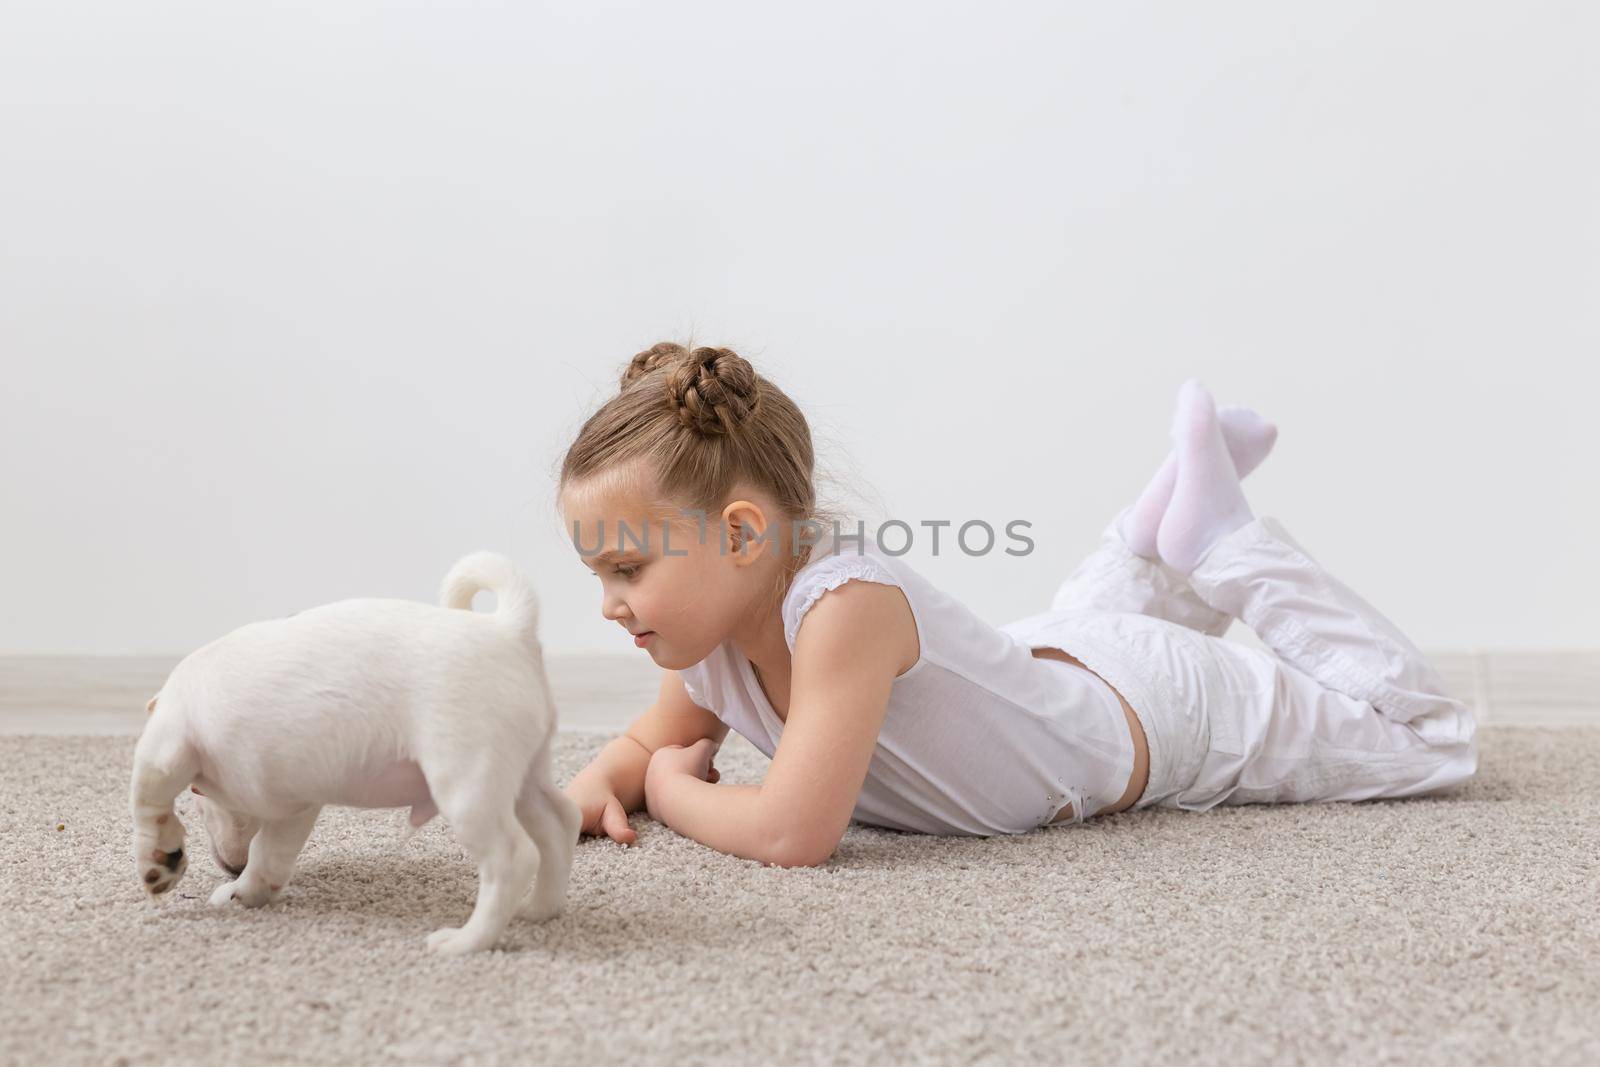 people, children and pets concept - little child girl lying on the floor with cute puppy.